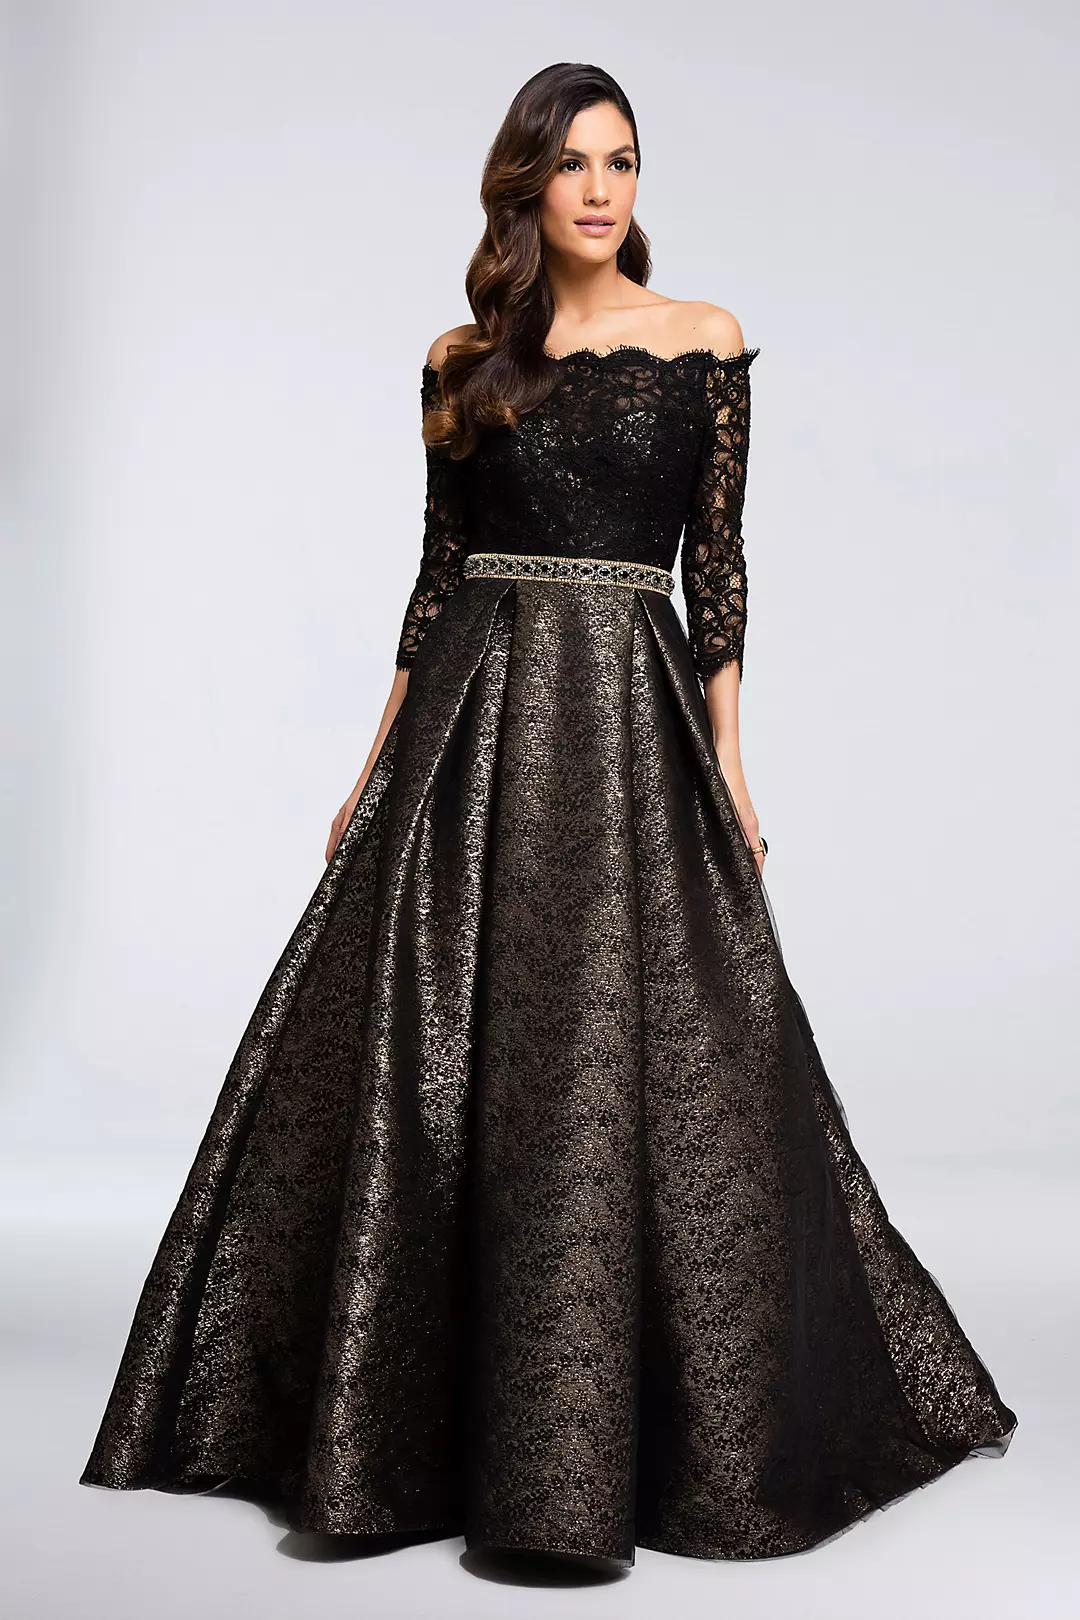 Belted Scallop Lace Ball Gown with Metallic Skirt Image